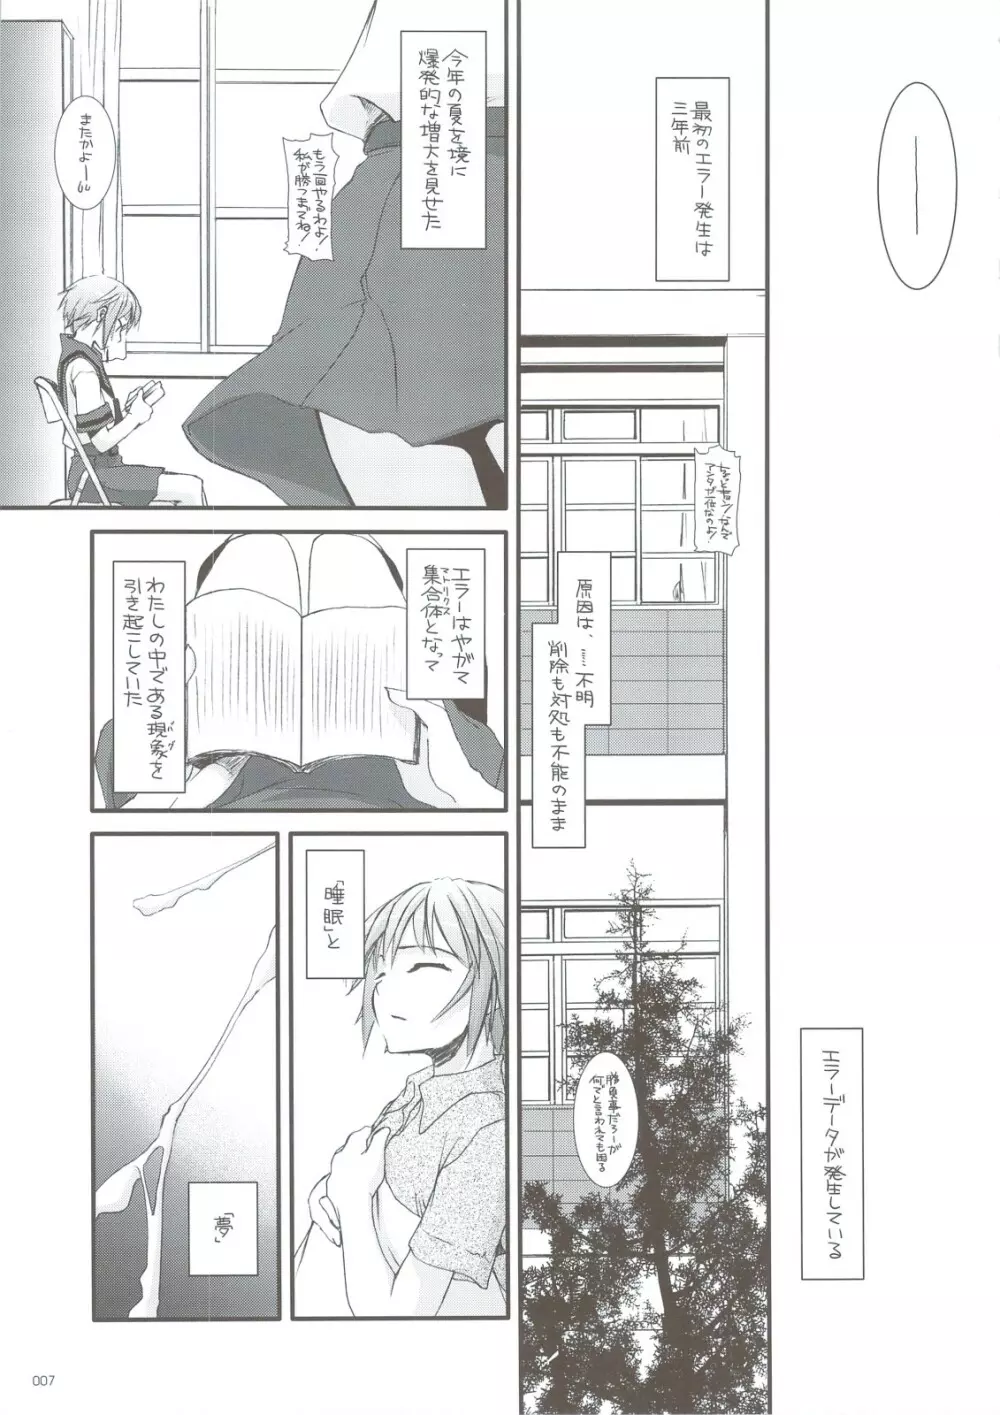 DL-SOS 総集編 - page6